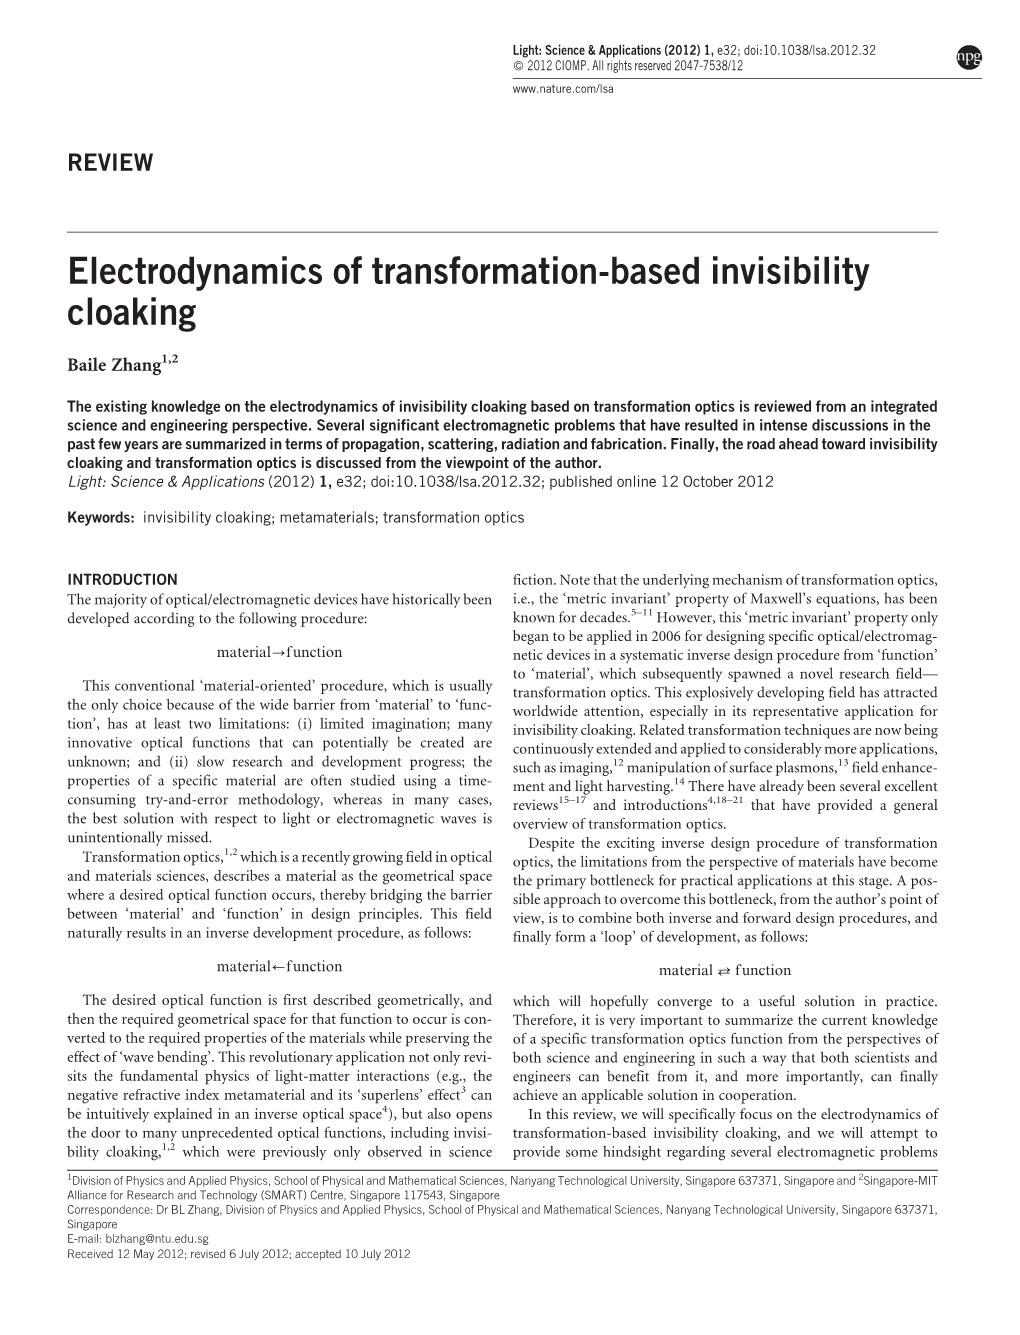 Electrodynamics of Transformation-Based Invisibility Cloaking